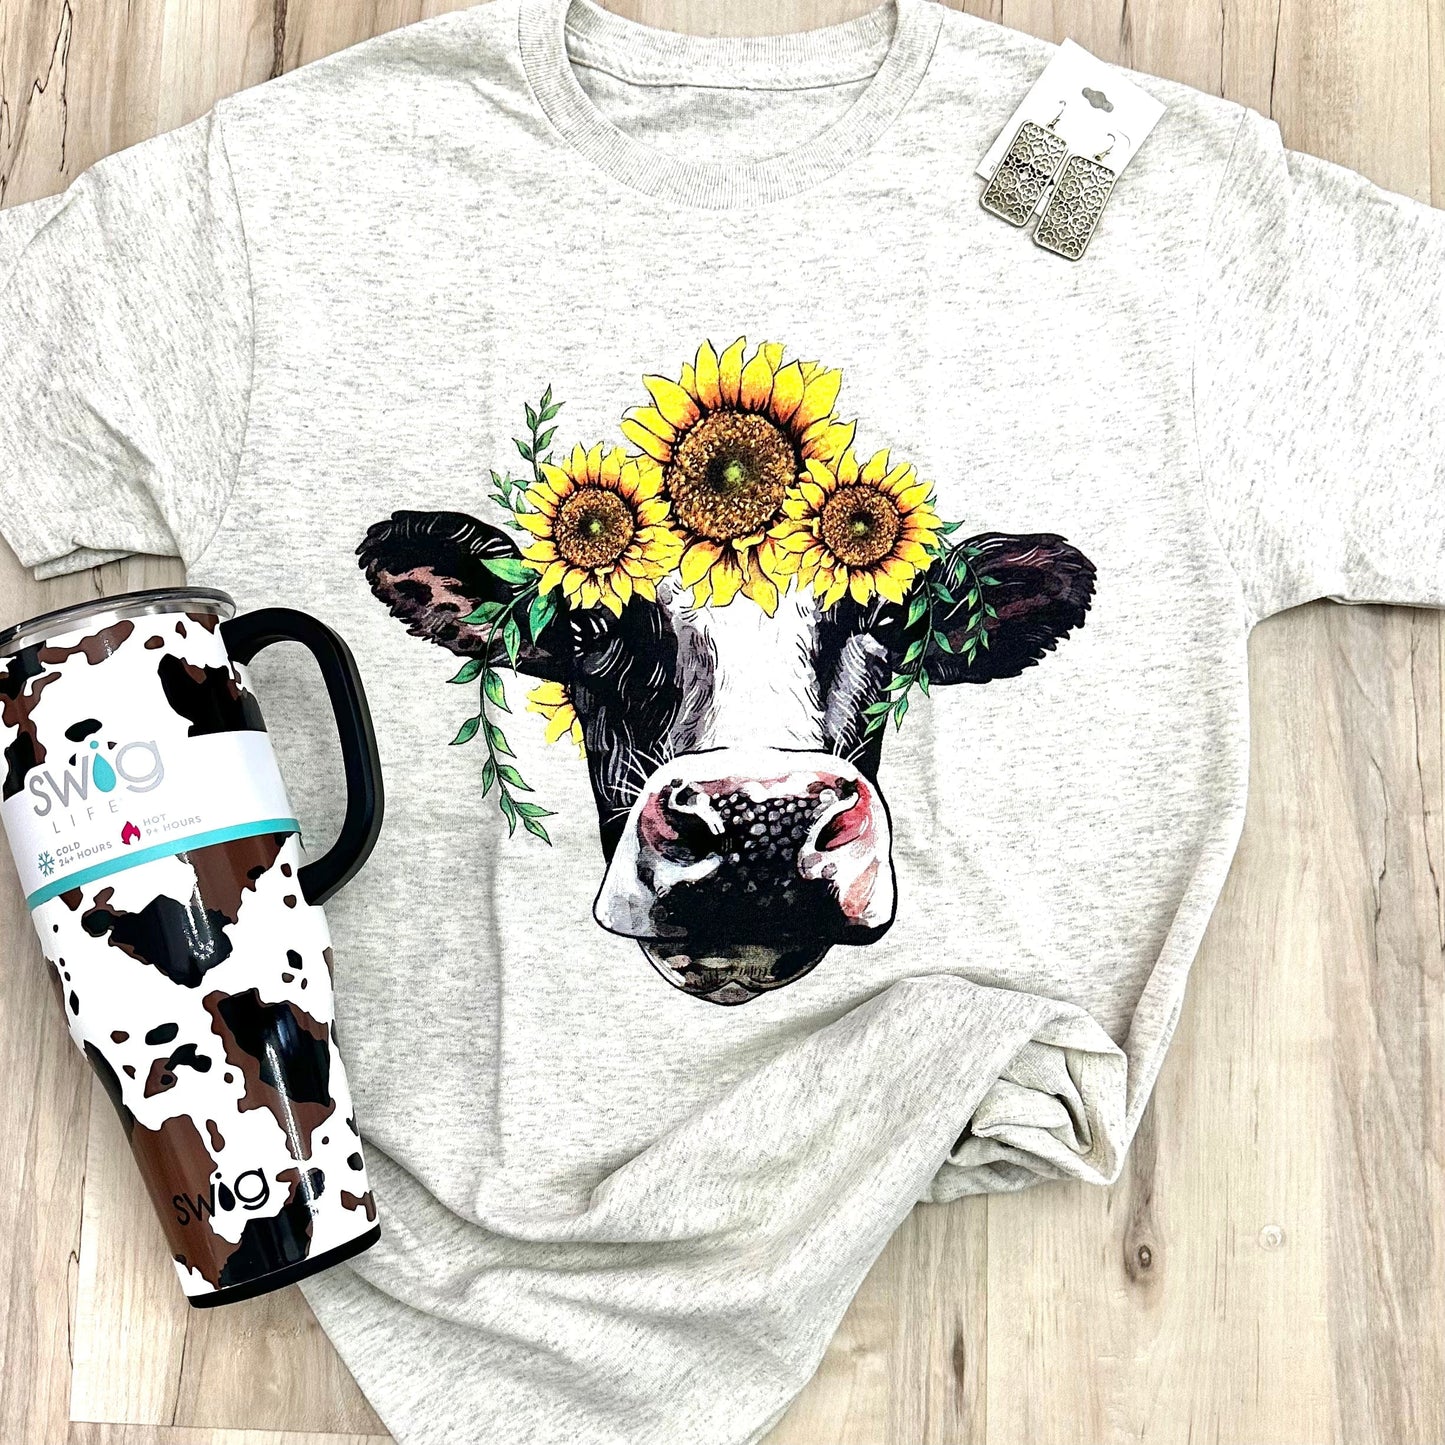 Envy Stylz Boutique Women - Apparel - Shirts - T-Shirts Sunflower Cow Graphic Tee